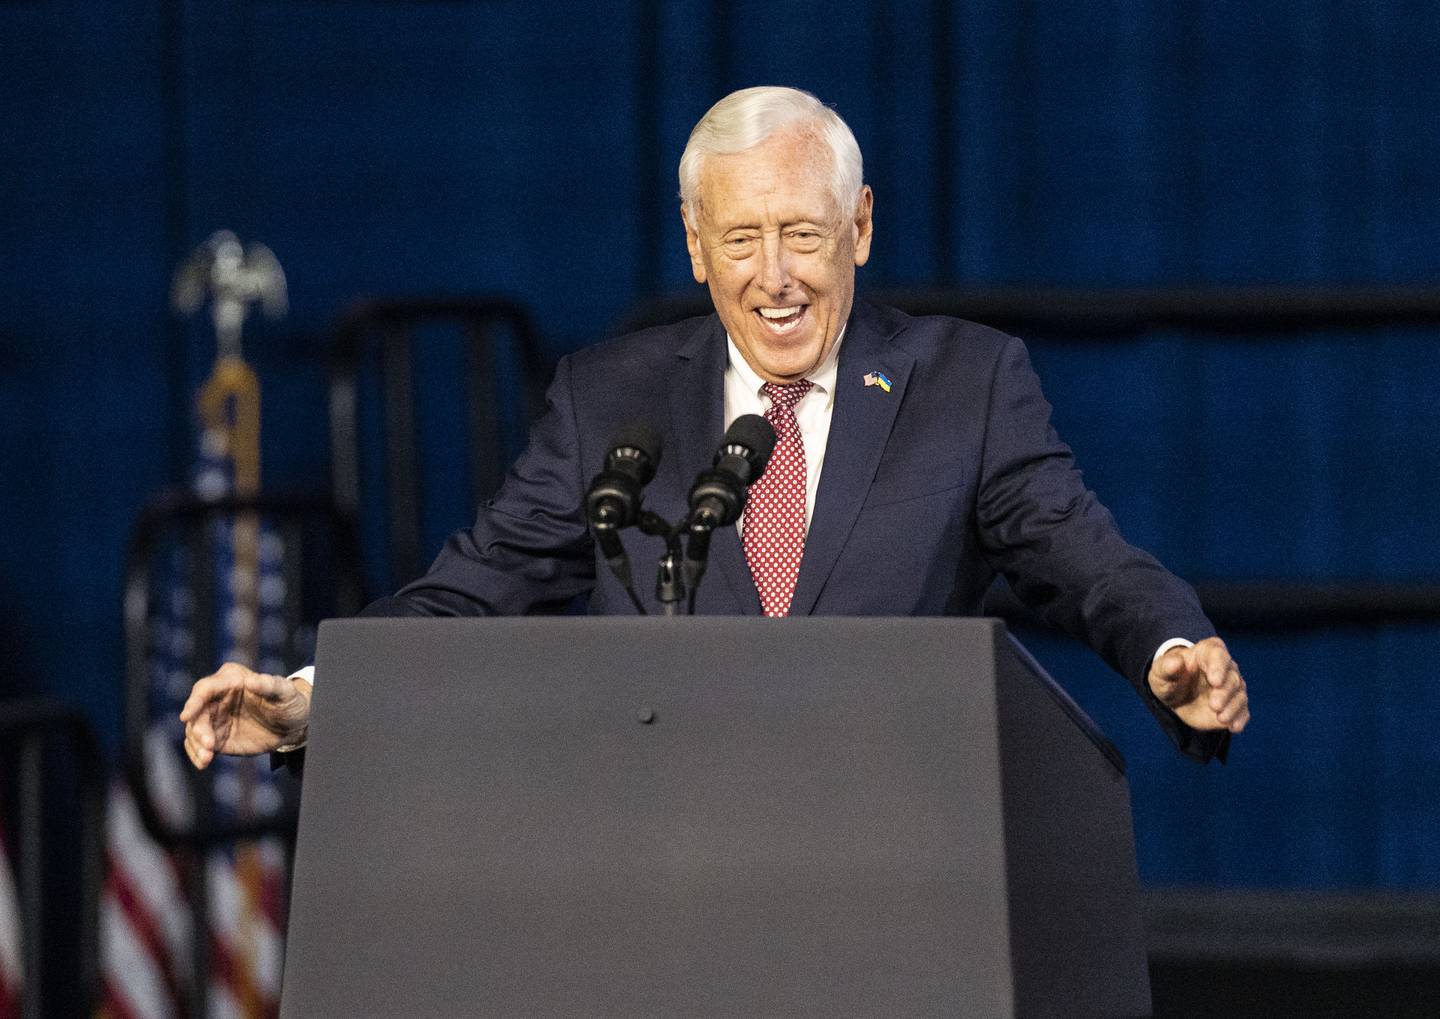 U.S. House Majority Leader Steny Hoyer, speaks at a campaign event in support of gubernatorial candidate Wes Moore at Bowie State University, in Bowie, MD. November 7, 2022.